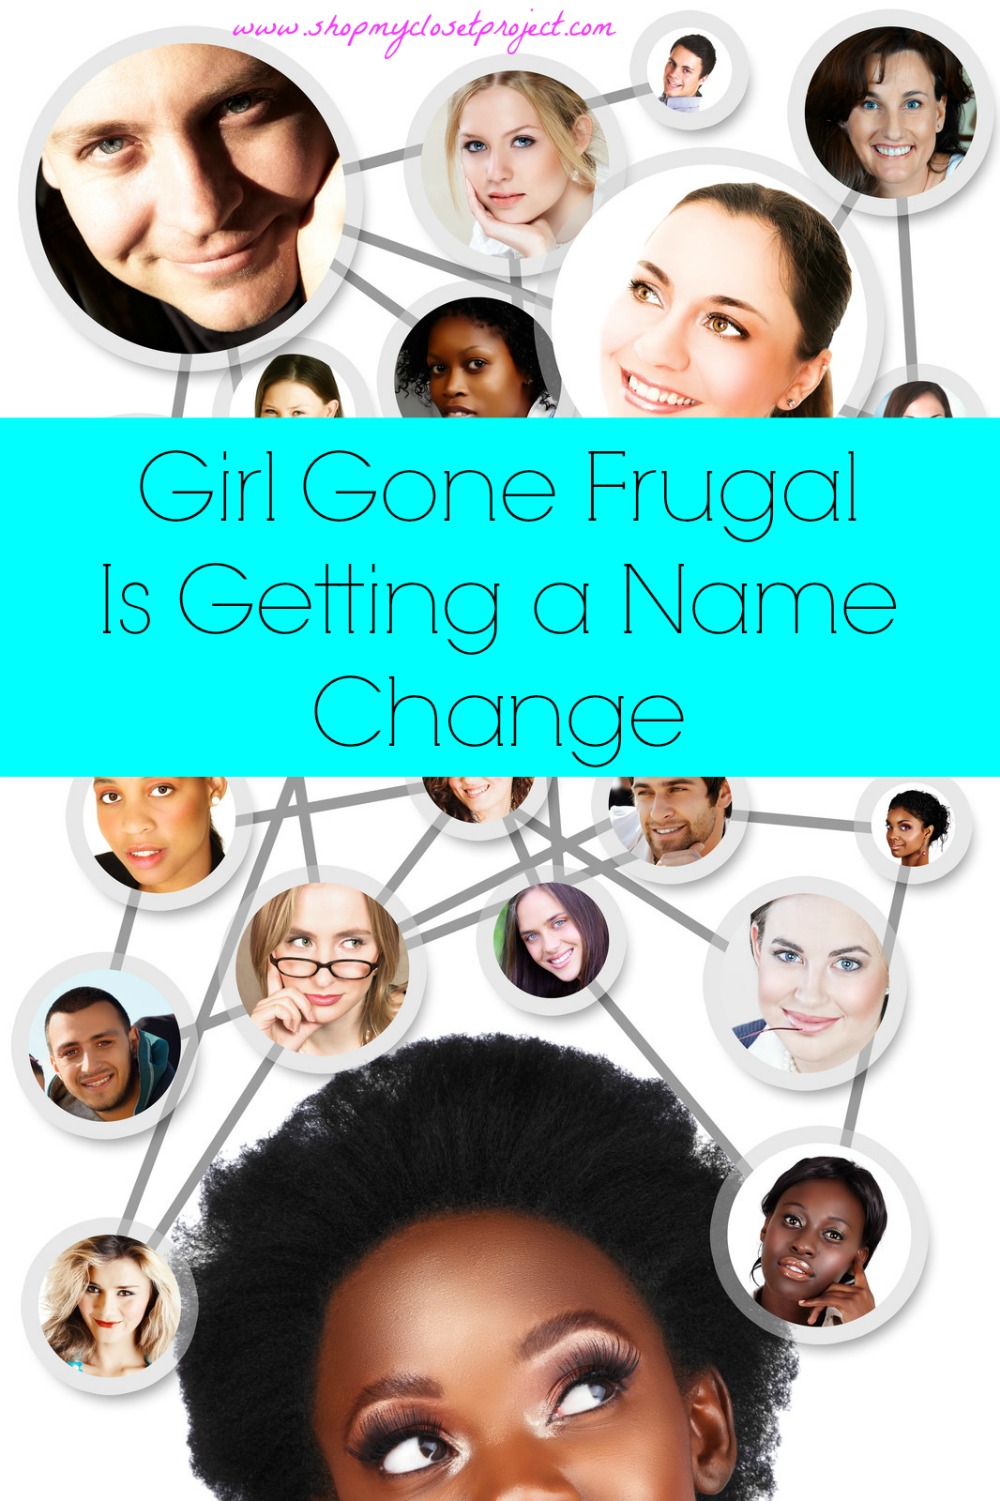 Girl Gone Frugal Podcast is Getting a Name Change!